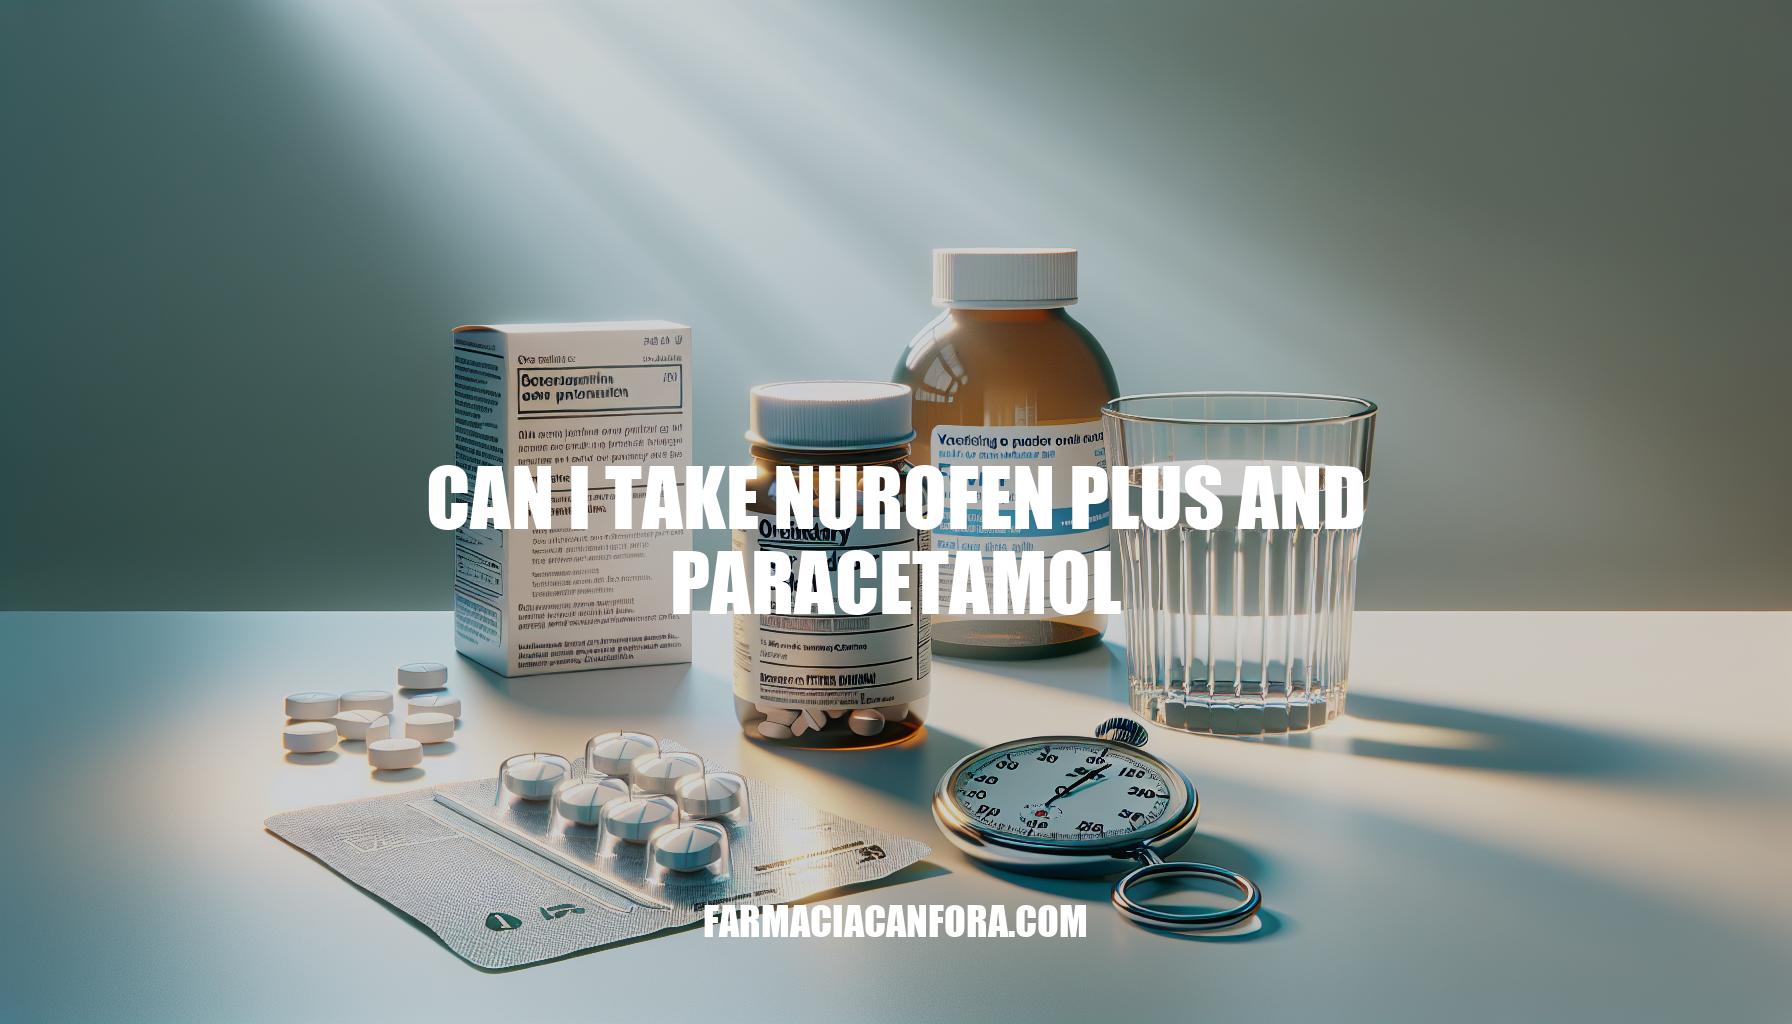 Can I Take Nurofen Plus and Paracetamol: Safety and Dosage Guide